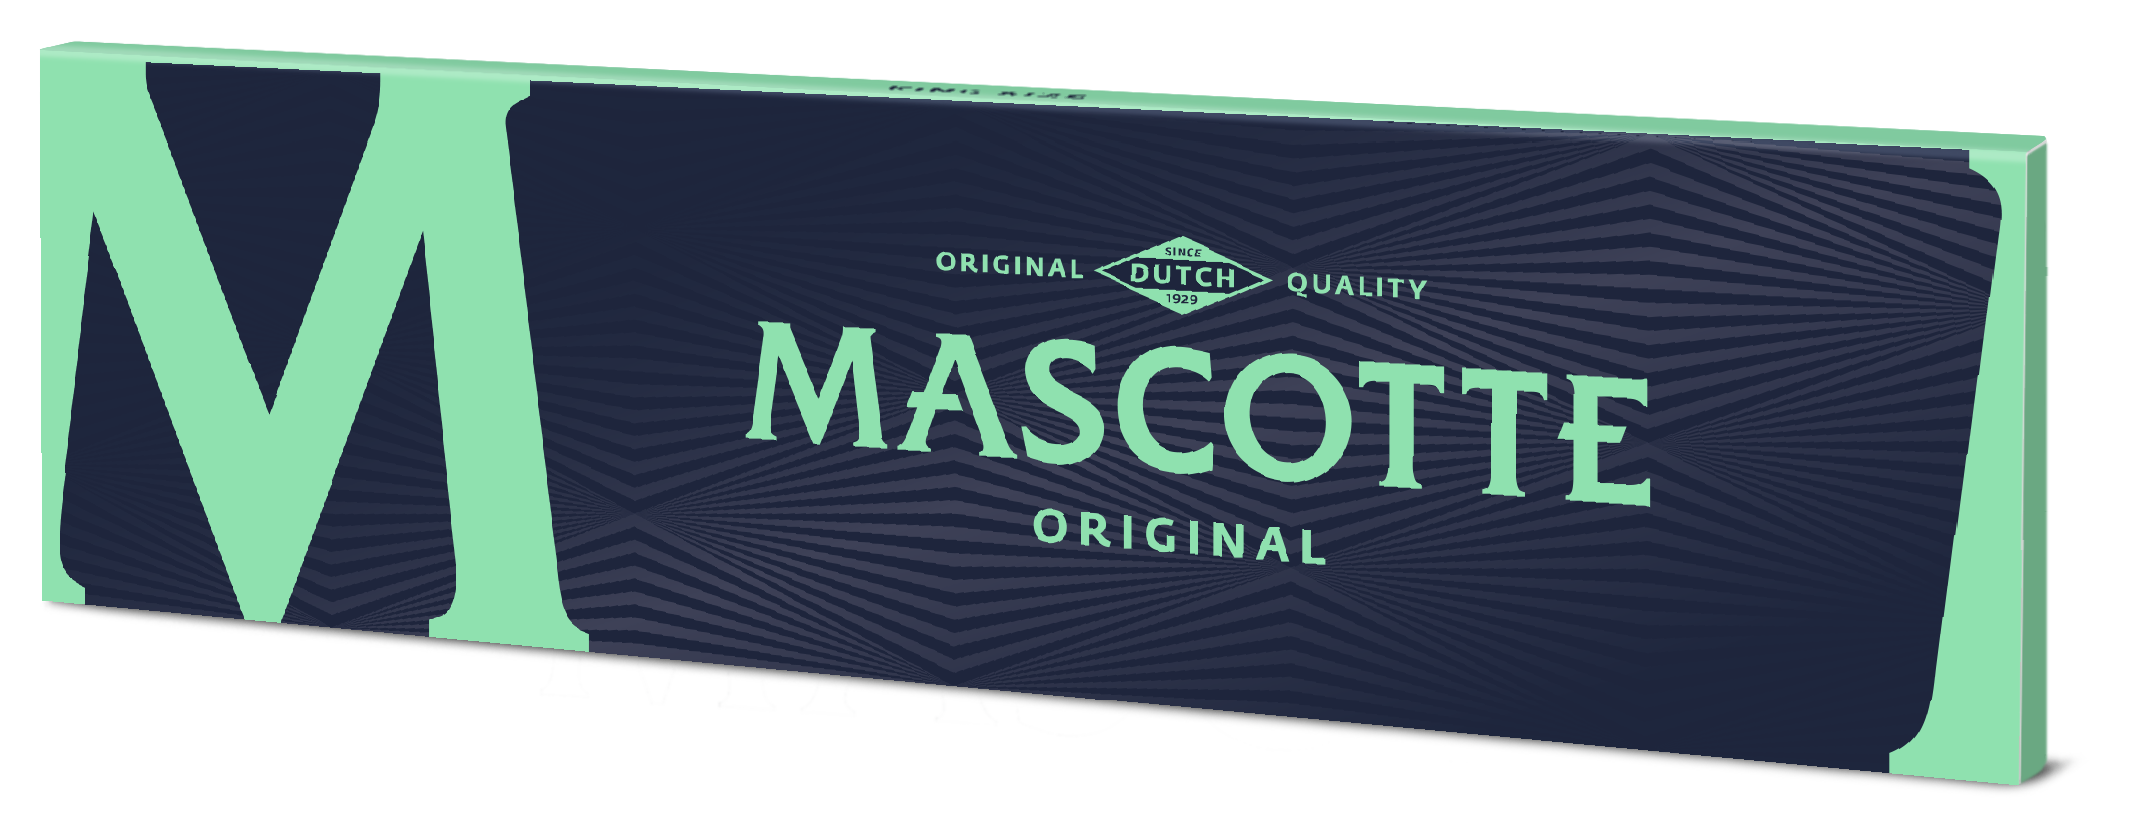 Original (King Size with magnet) - Mascotte